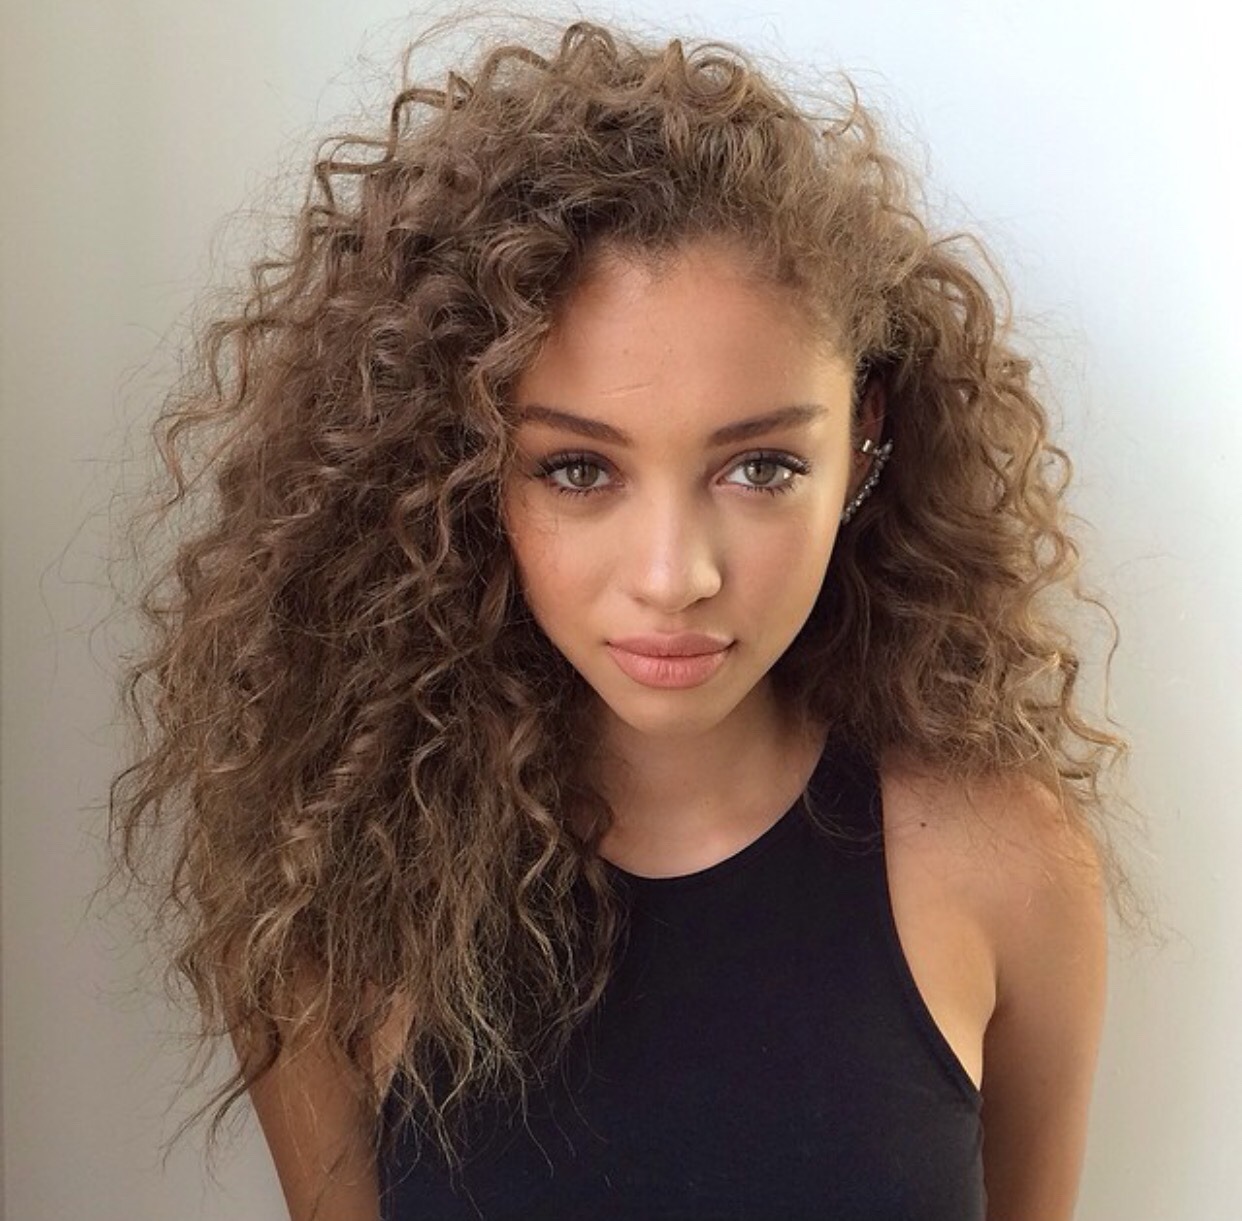 Long hairstyles for black women curly hair